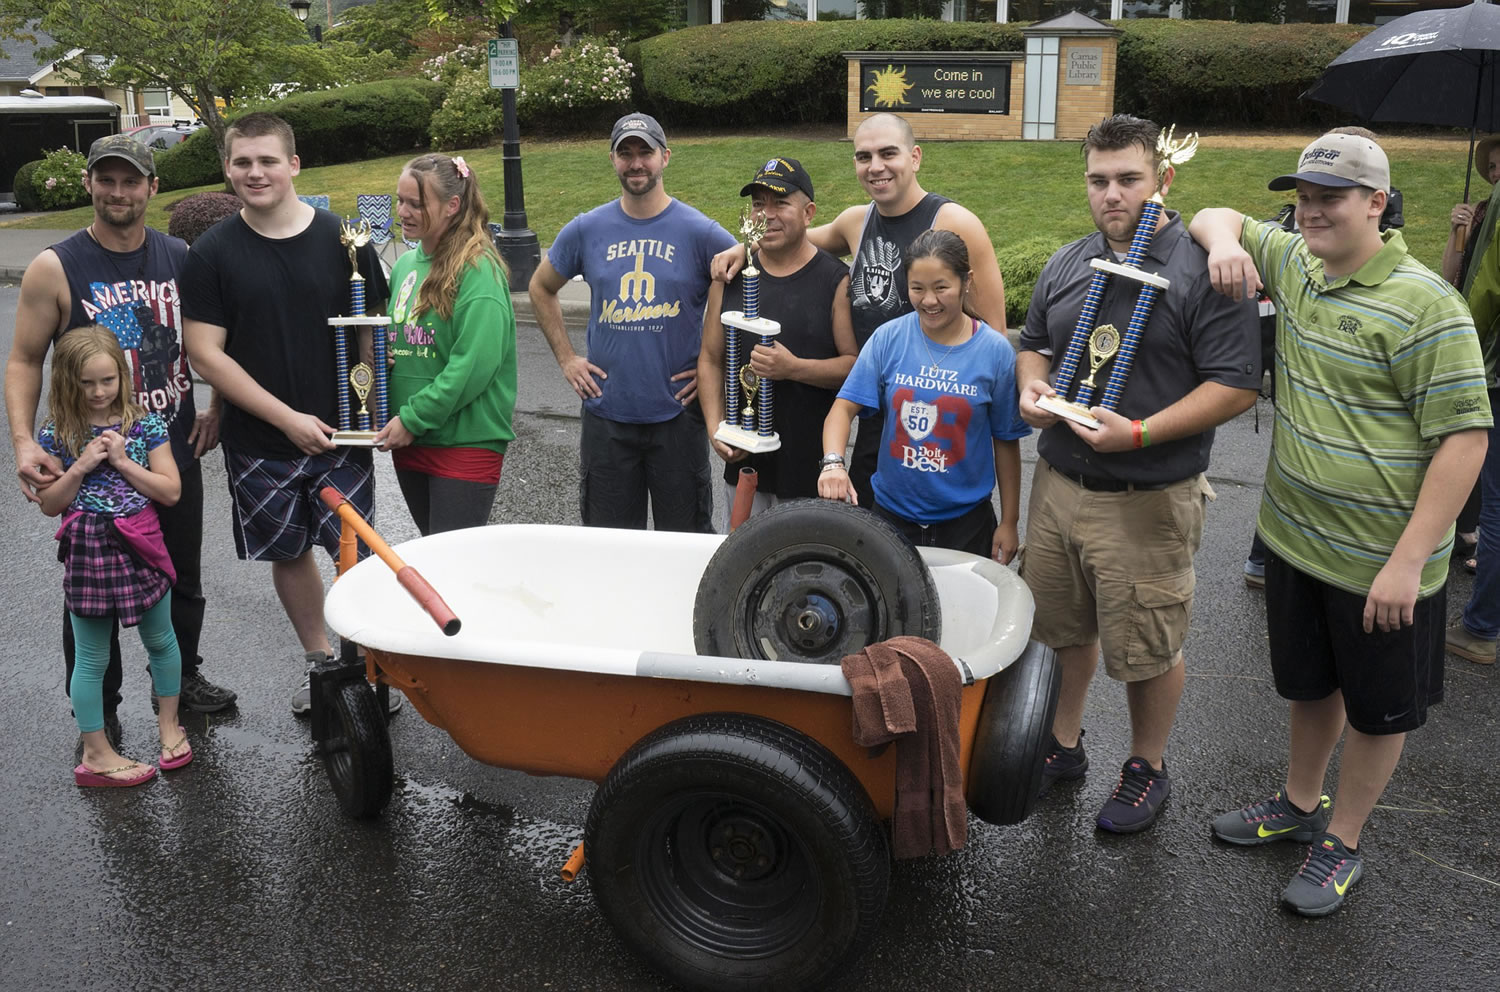 The three winning teams from the Camas Days bathtub race pose for a portrait after receiving awards on Saturday.